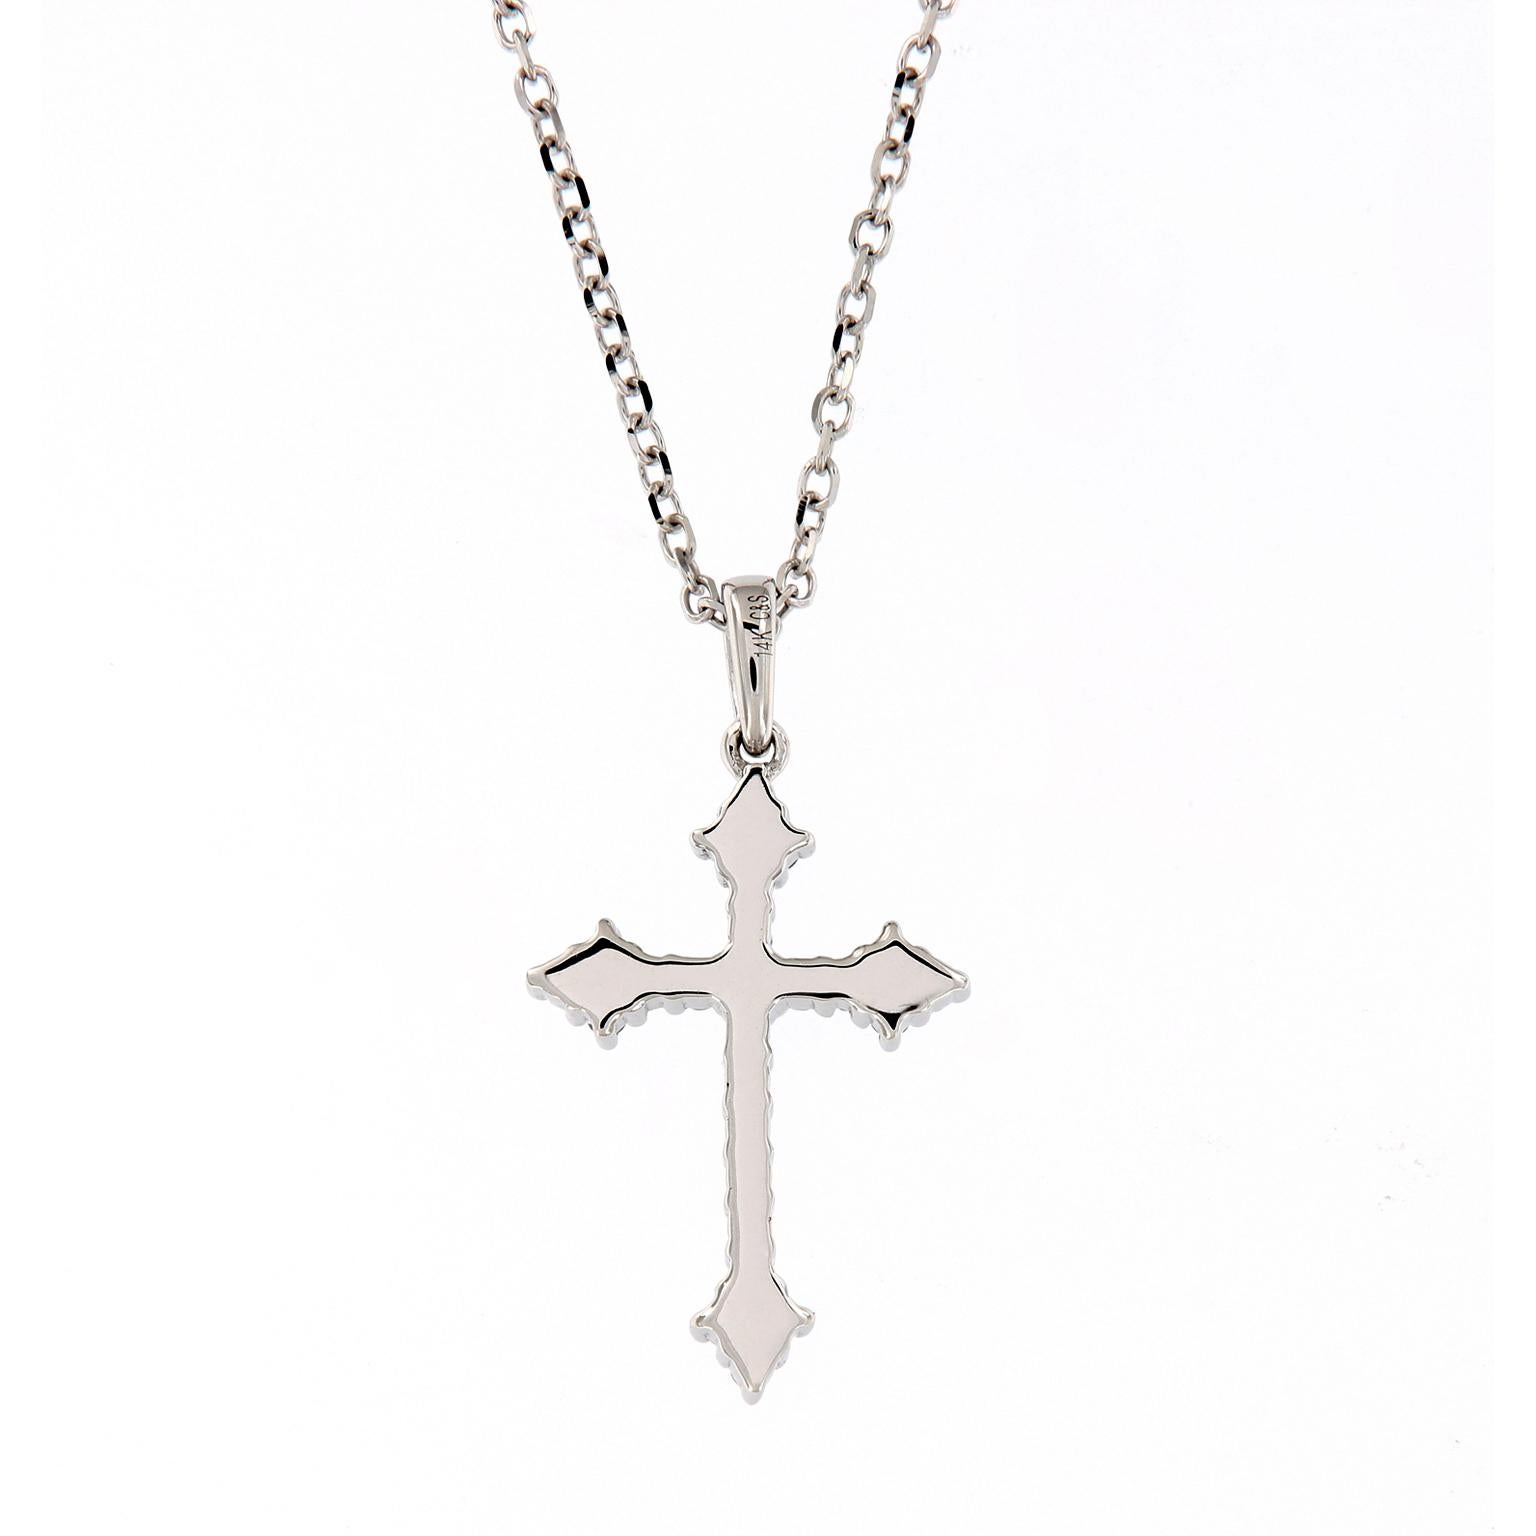 This beautiful symbol of faith is crafted in 14k white gold with prong set round brilliant diamonds. Perfect for those making their confirmation or to wear everyday! 
Pendant hangs from an 18 inch chain that has a loop at 18 inch so it fits every